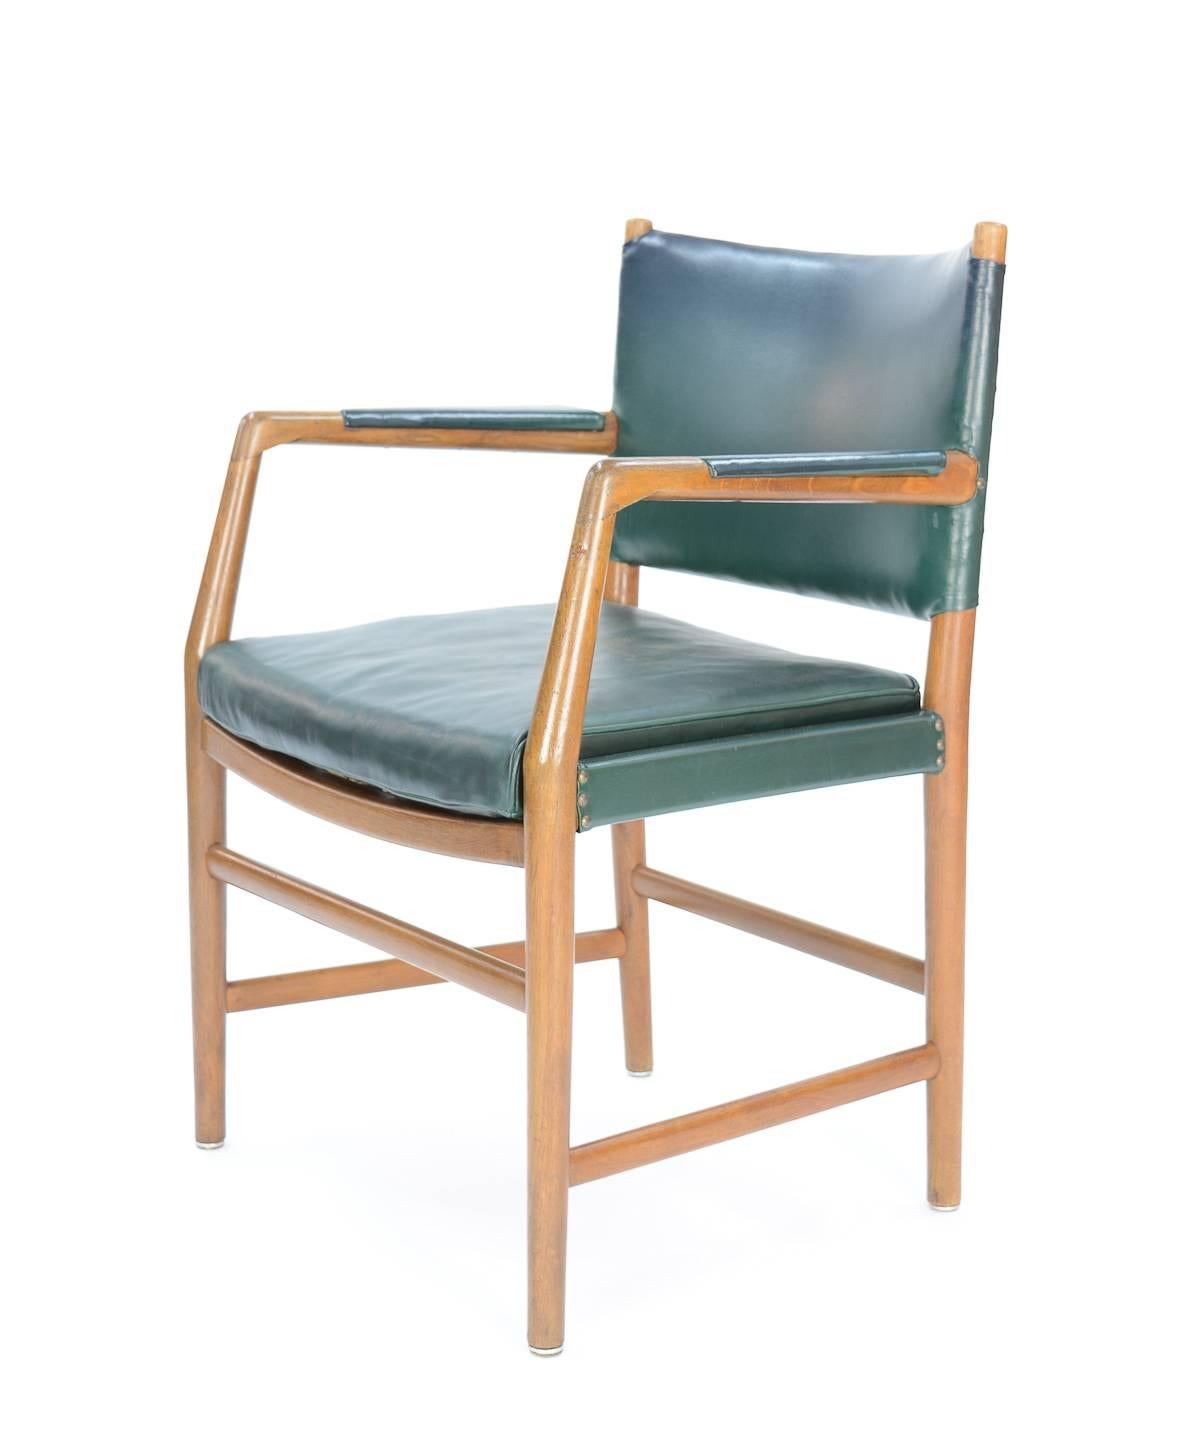 Hans Wegner designed this chair, circa 1940 while he was working with Arne Jacobsen and Erik Møller as the project leader for furniture design of the Aarhus City Hall. Wegner contacted the Aarhus firm, Planmøbler about designing a series of